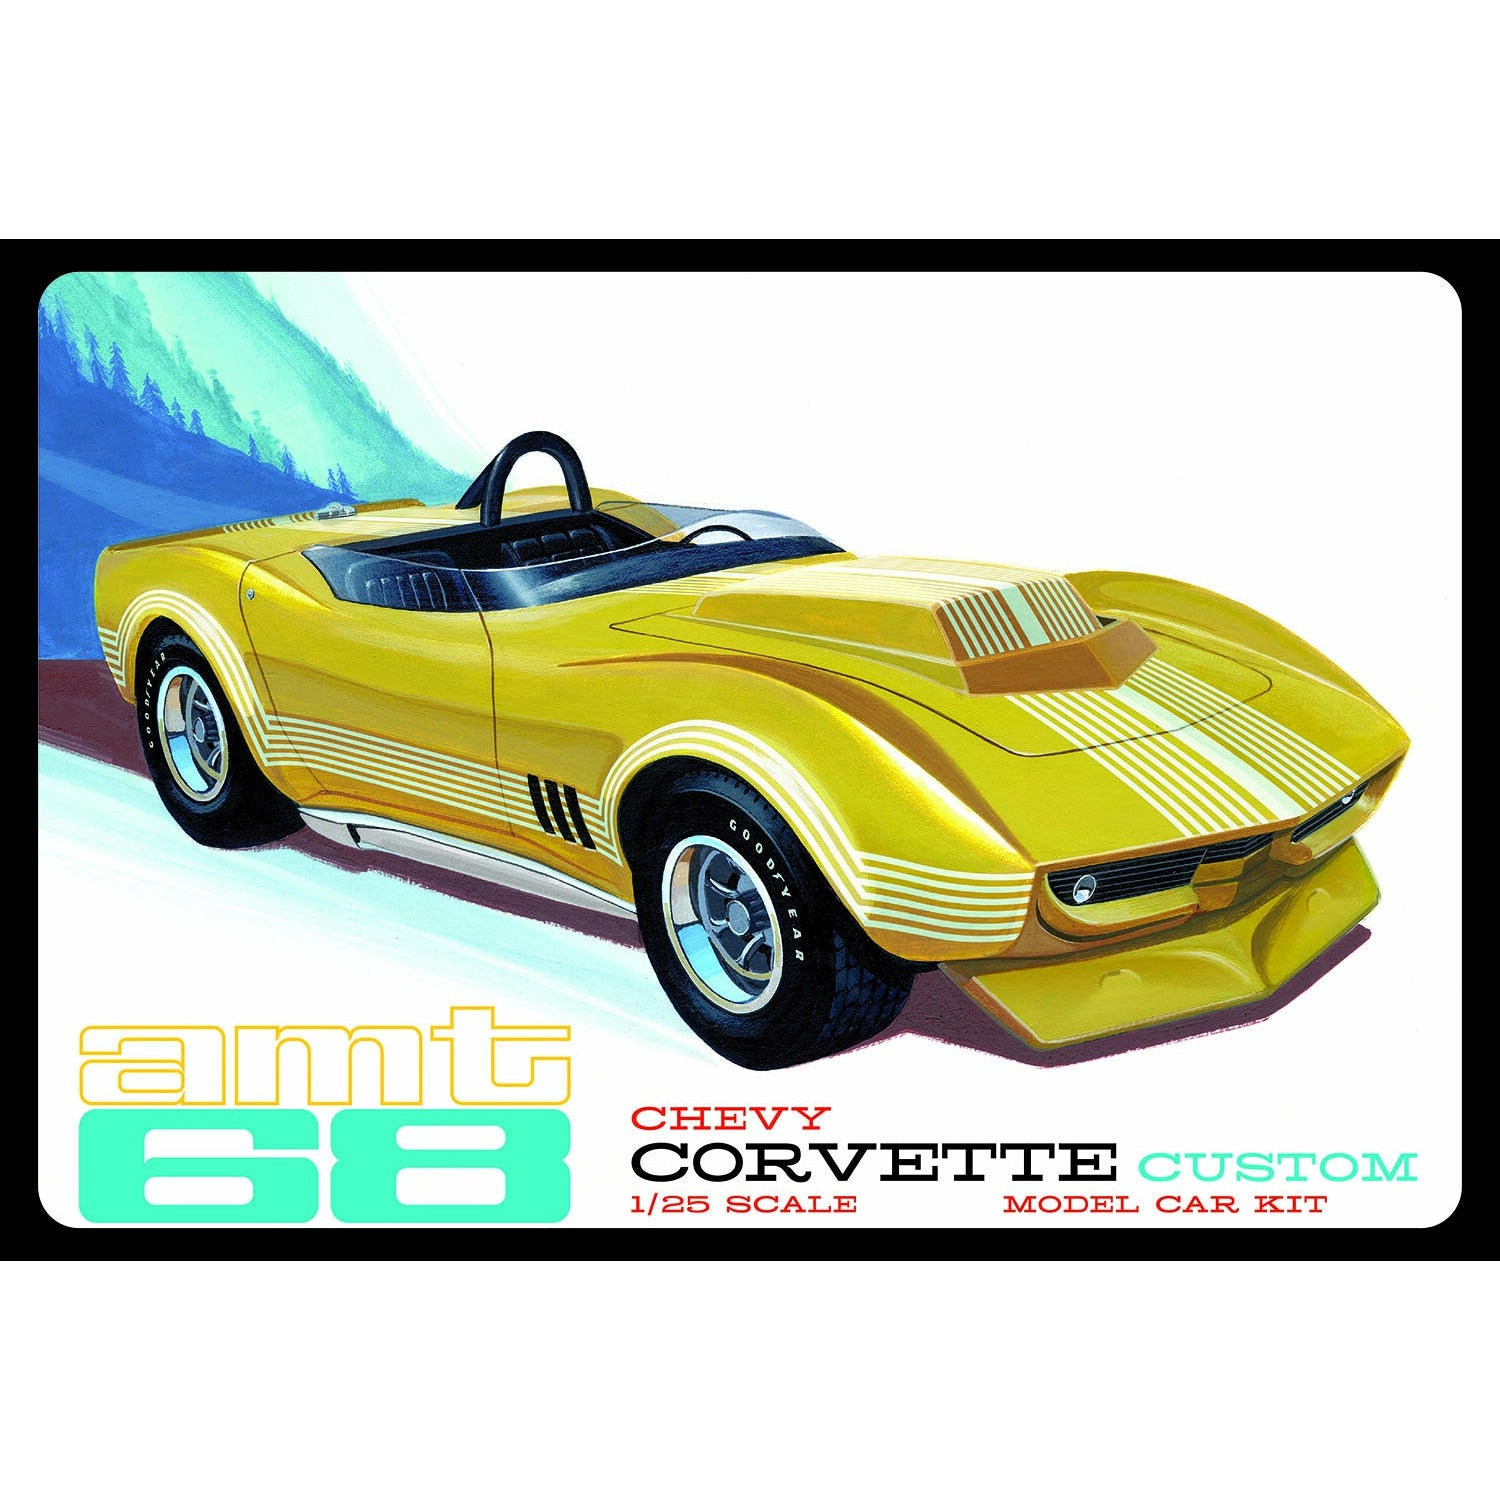 1953 Chevy Corvette (USPS Stamp Series) 1/25 Model Car Kit #1244 by AMT